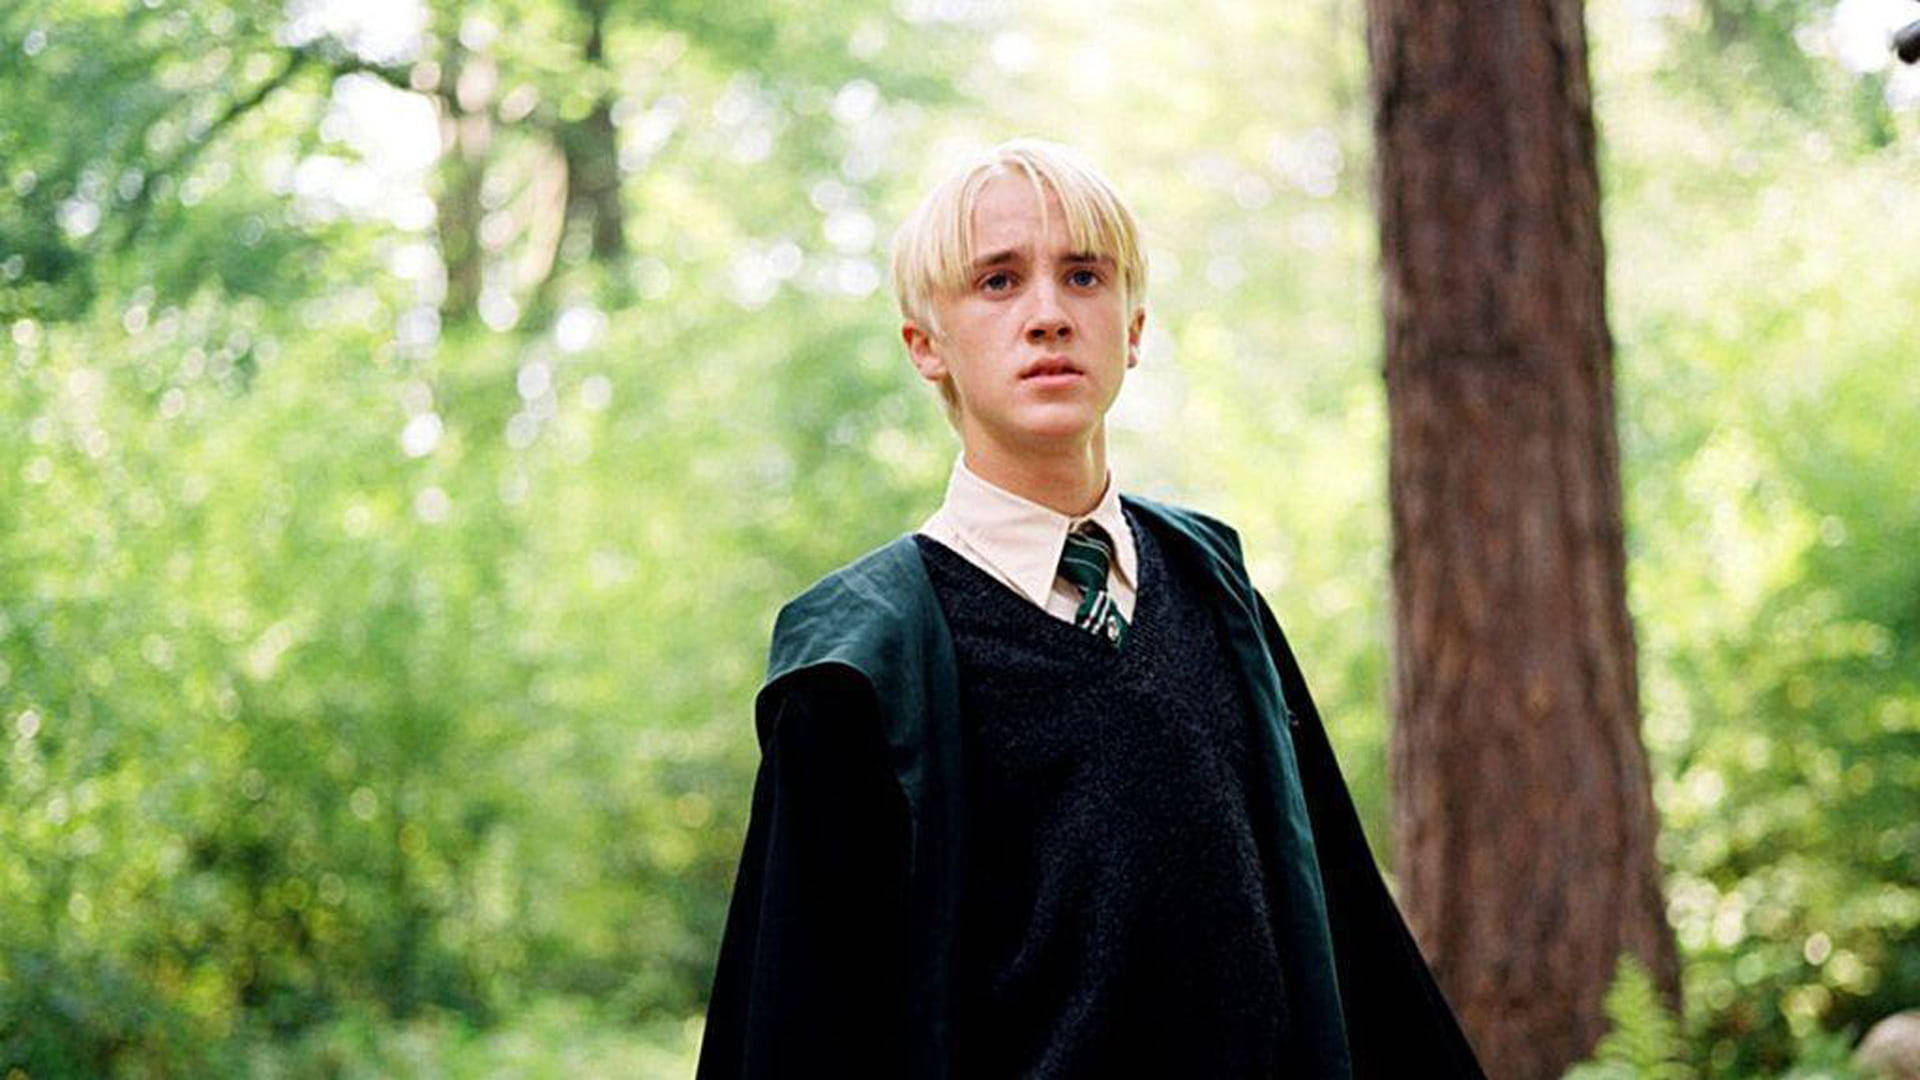 Top 999 Draco Malfoy Wallpaper Full HD 4K Free To Use